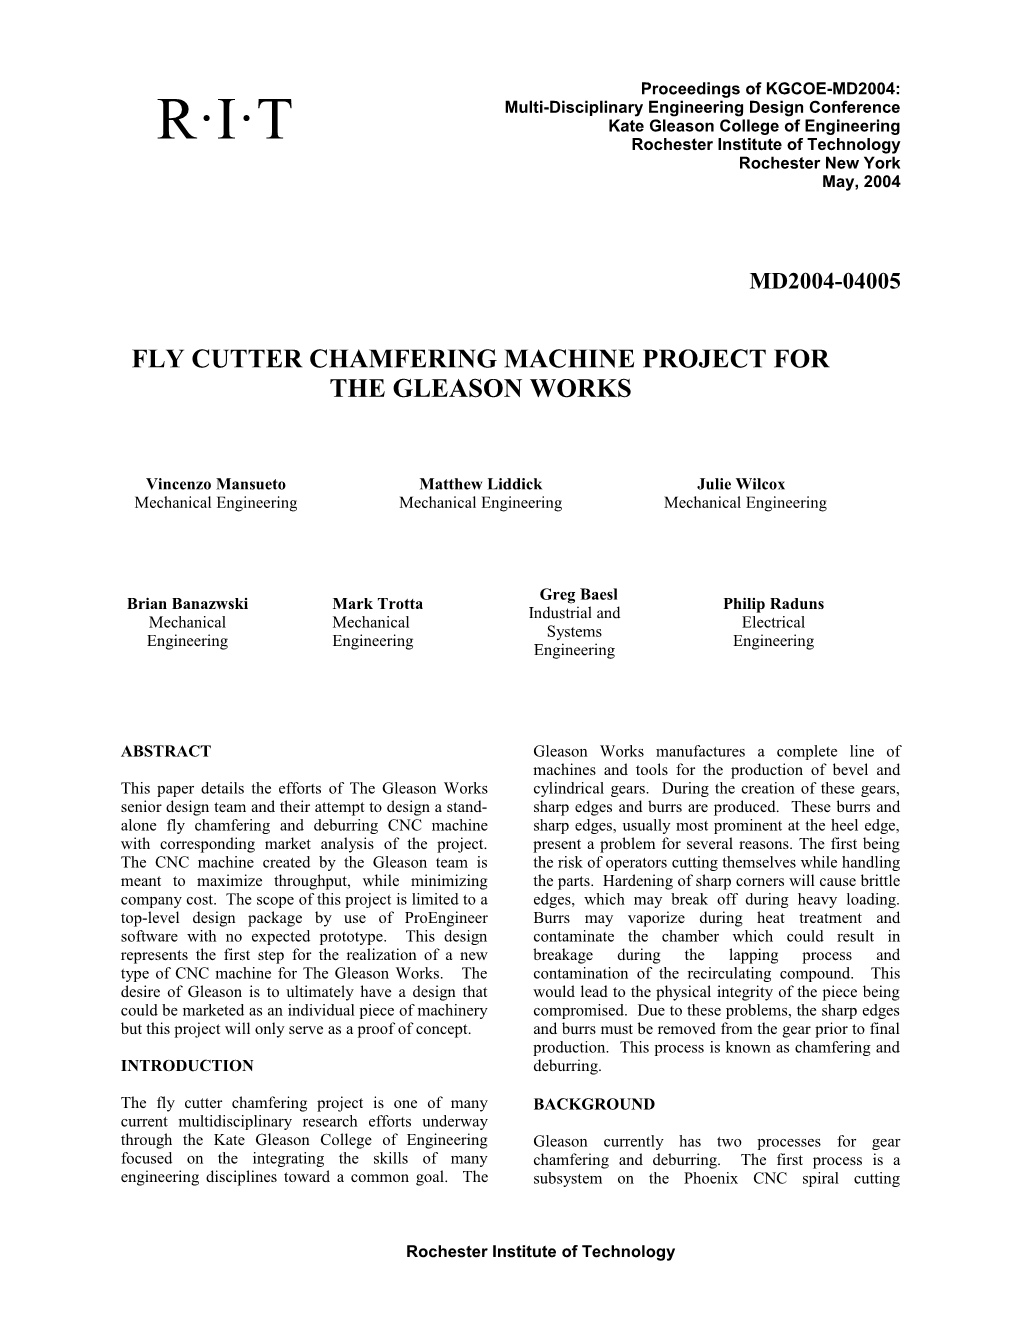 Proceedings of KGCOE-MD2004: Multi-Disciplinary Engineering Design Conference Page 3